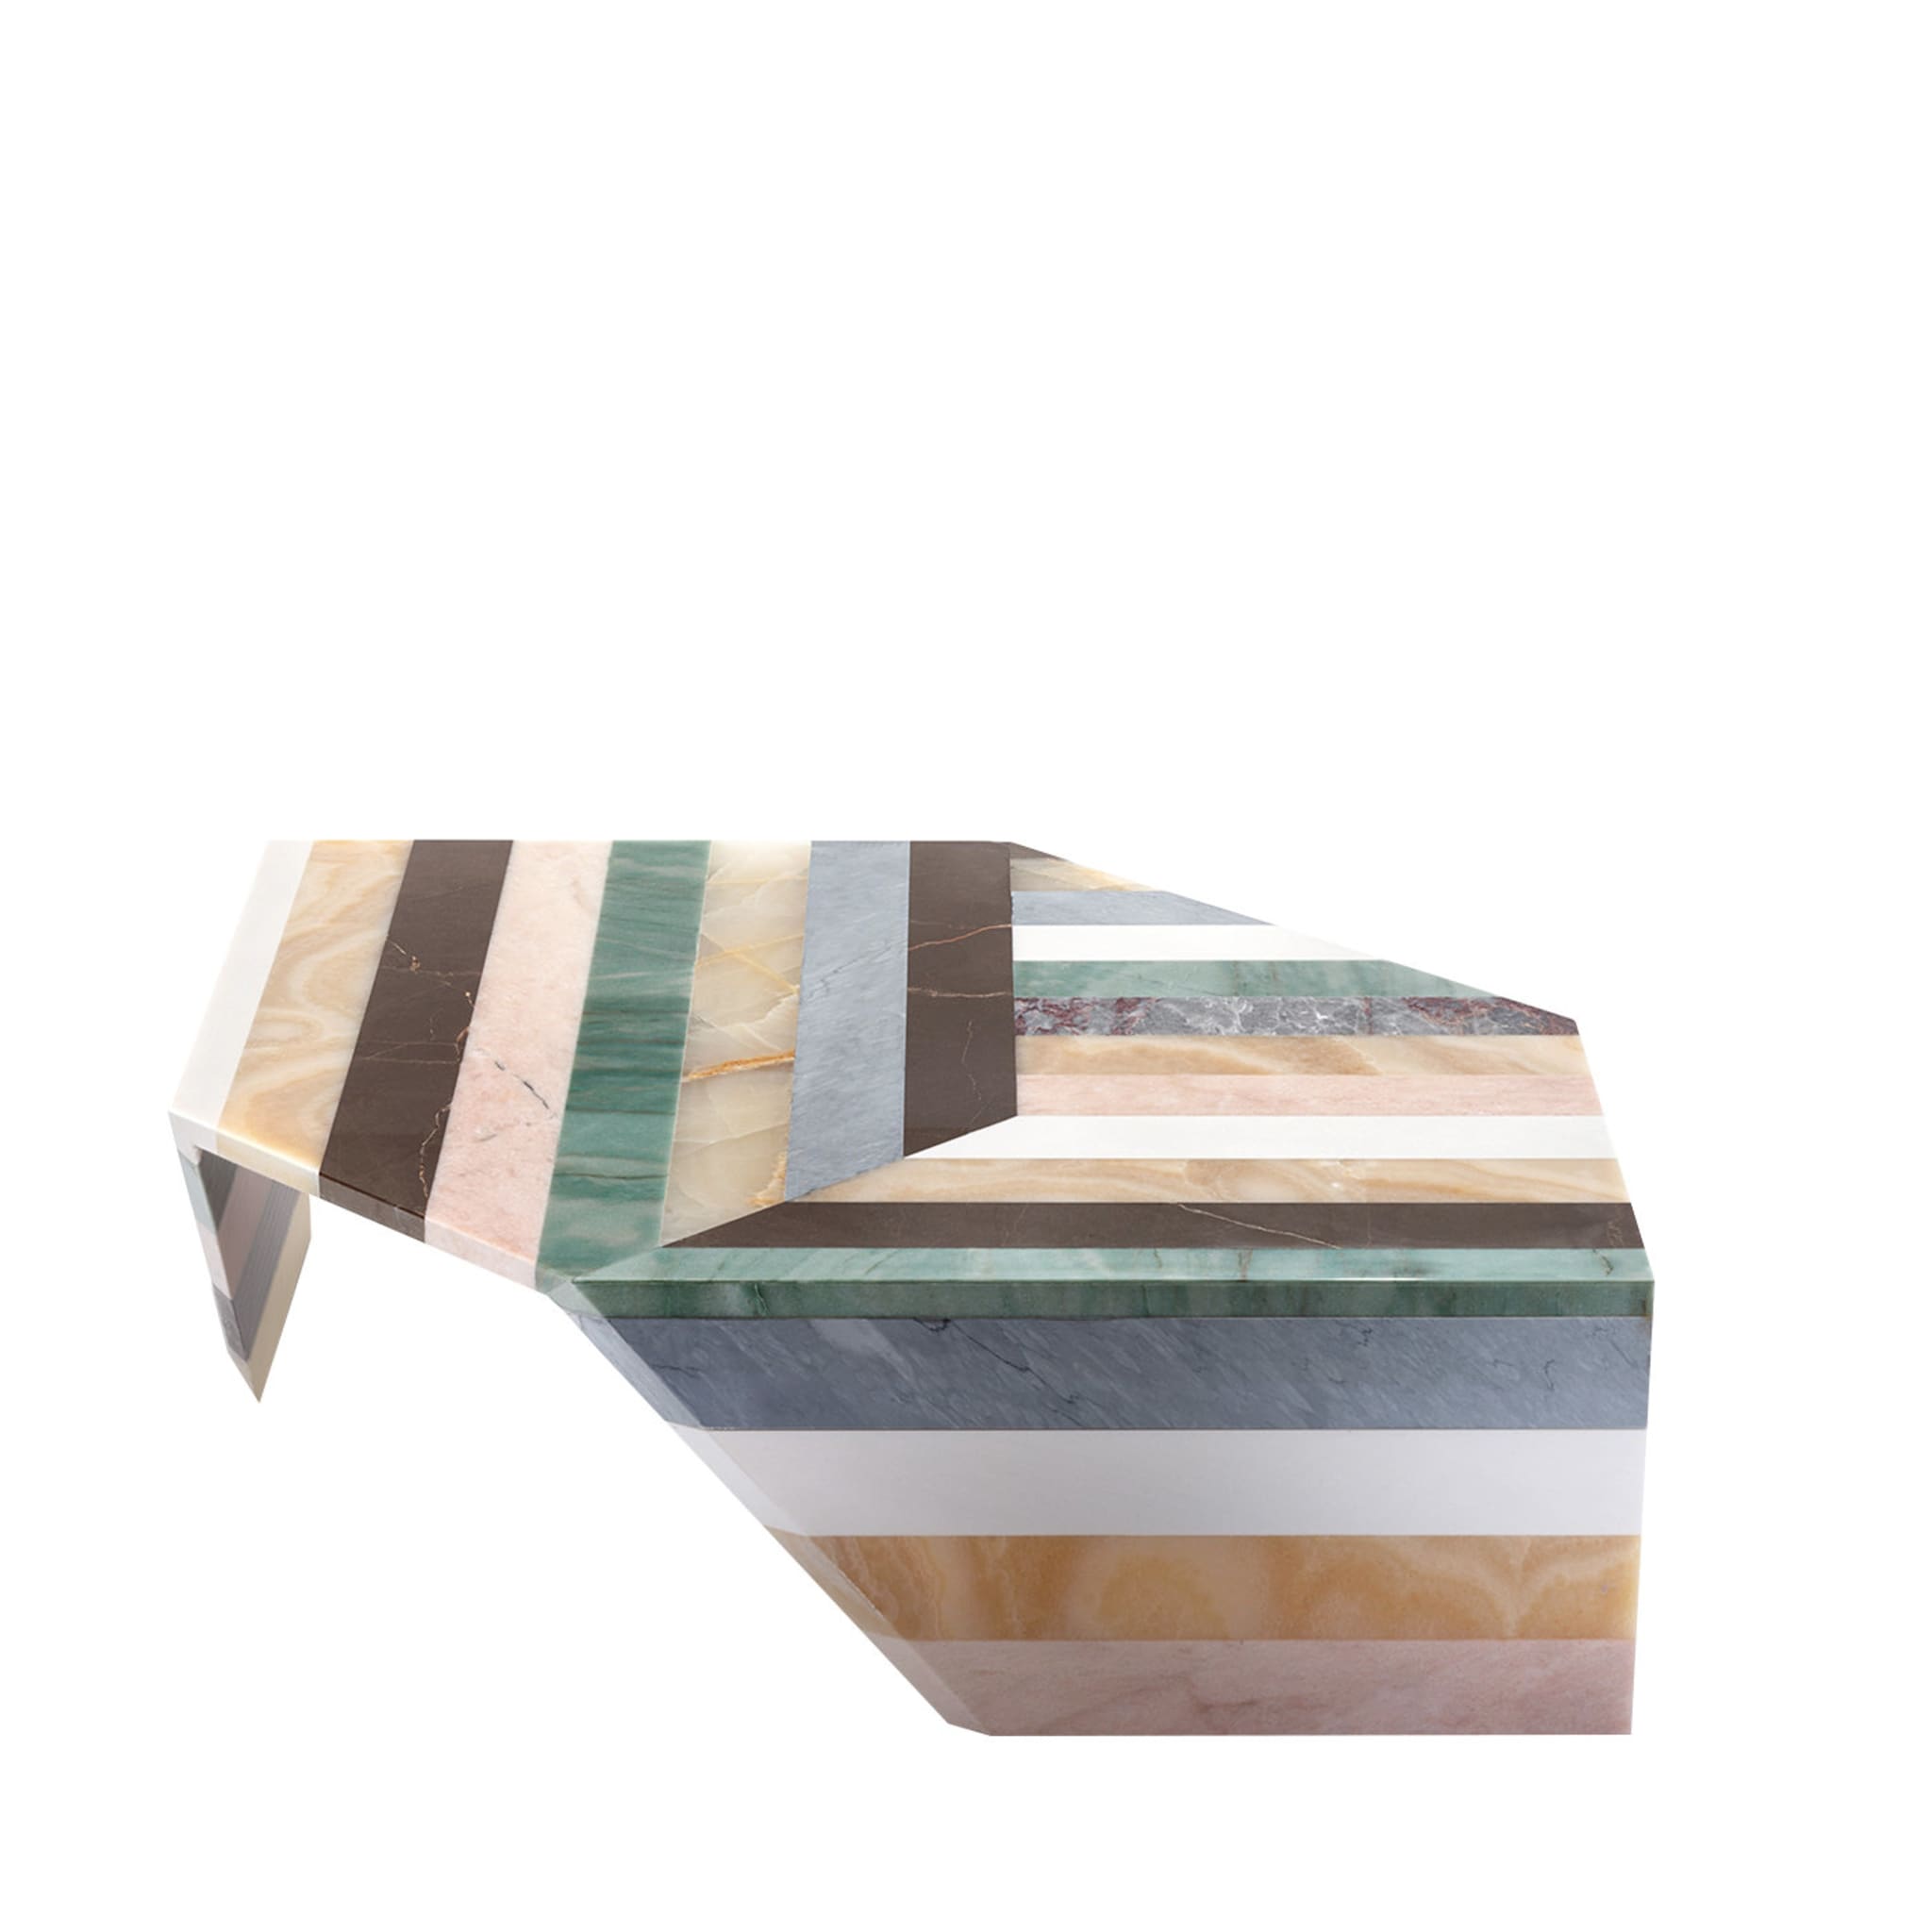 Origami Stripes Coffee Table II by Patricia Urquiola - Main view